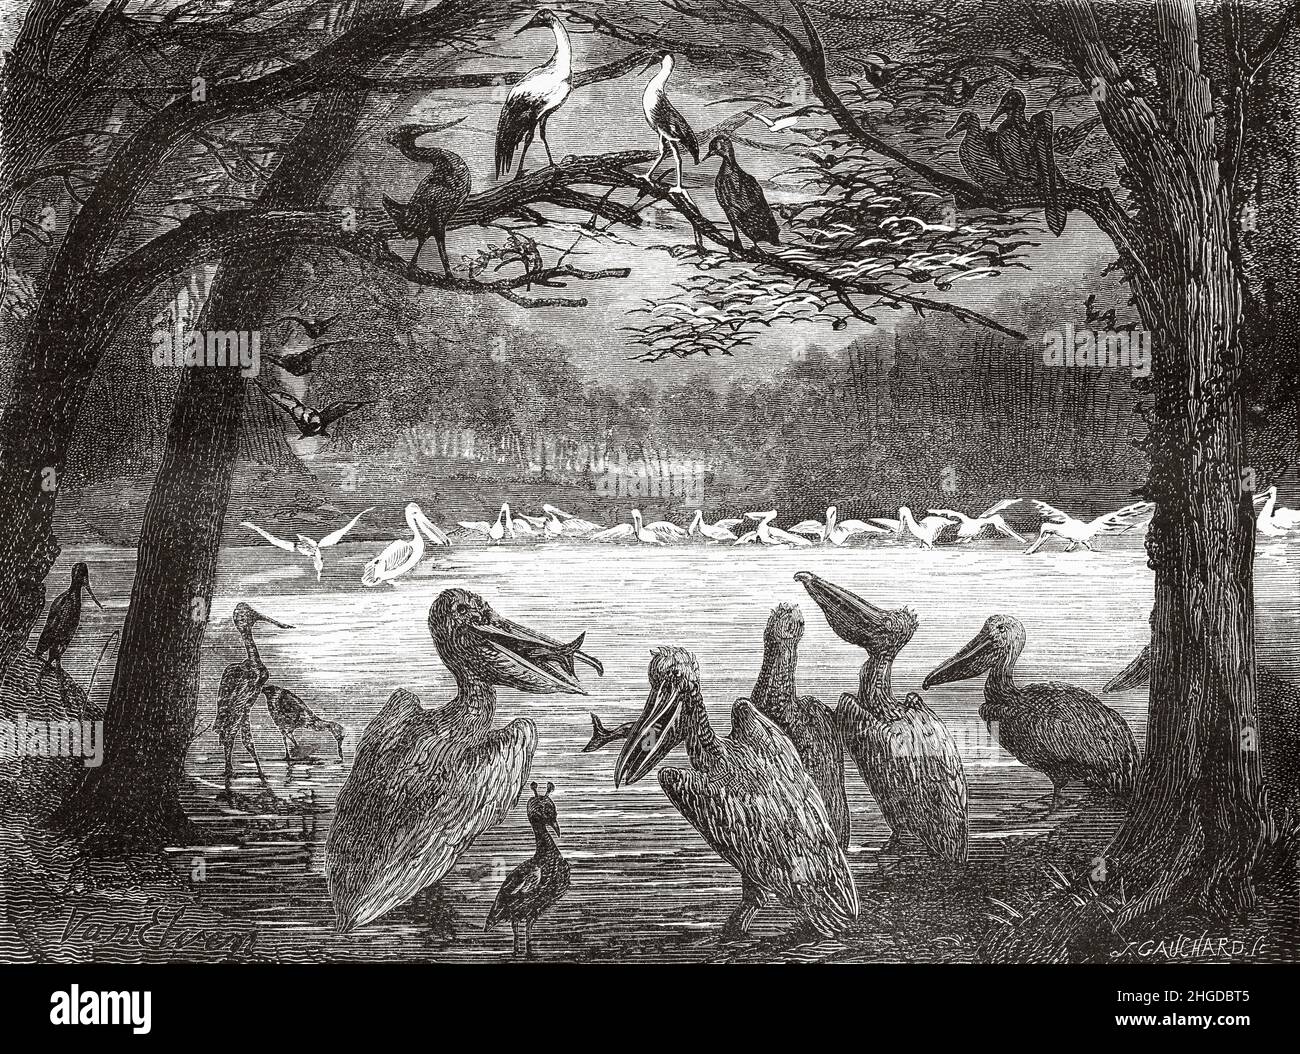 Pelicans fishing in Big Cypress National Preserve, Florida, United States of America. Old 19th century engraved illustration from Four months in Florida by Achille Poussielgue, Le Tour du Monde 1870 Stock Photo